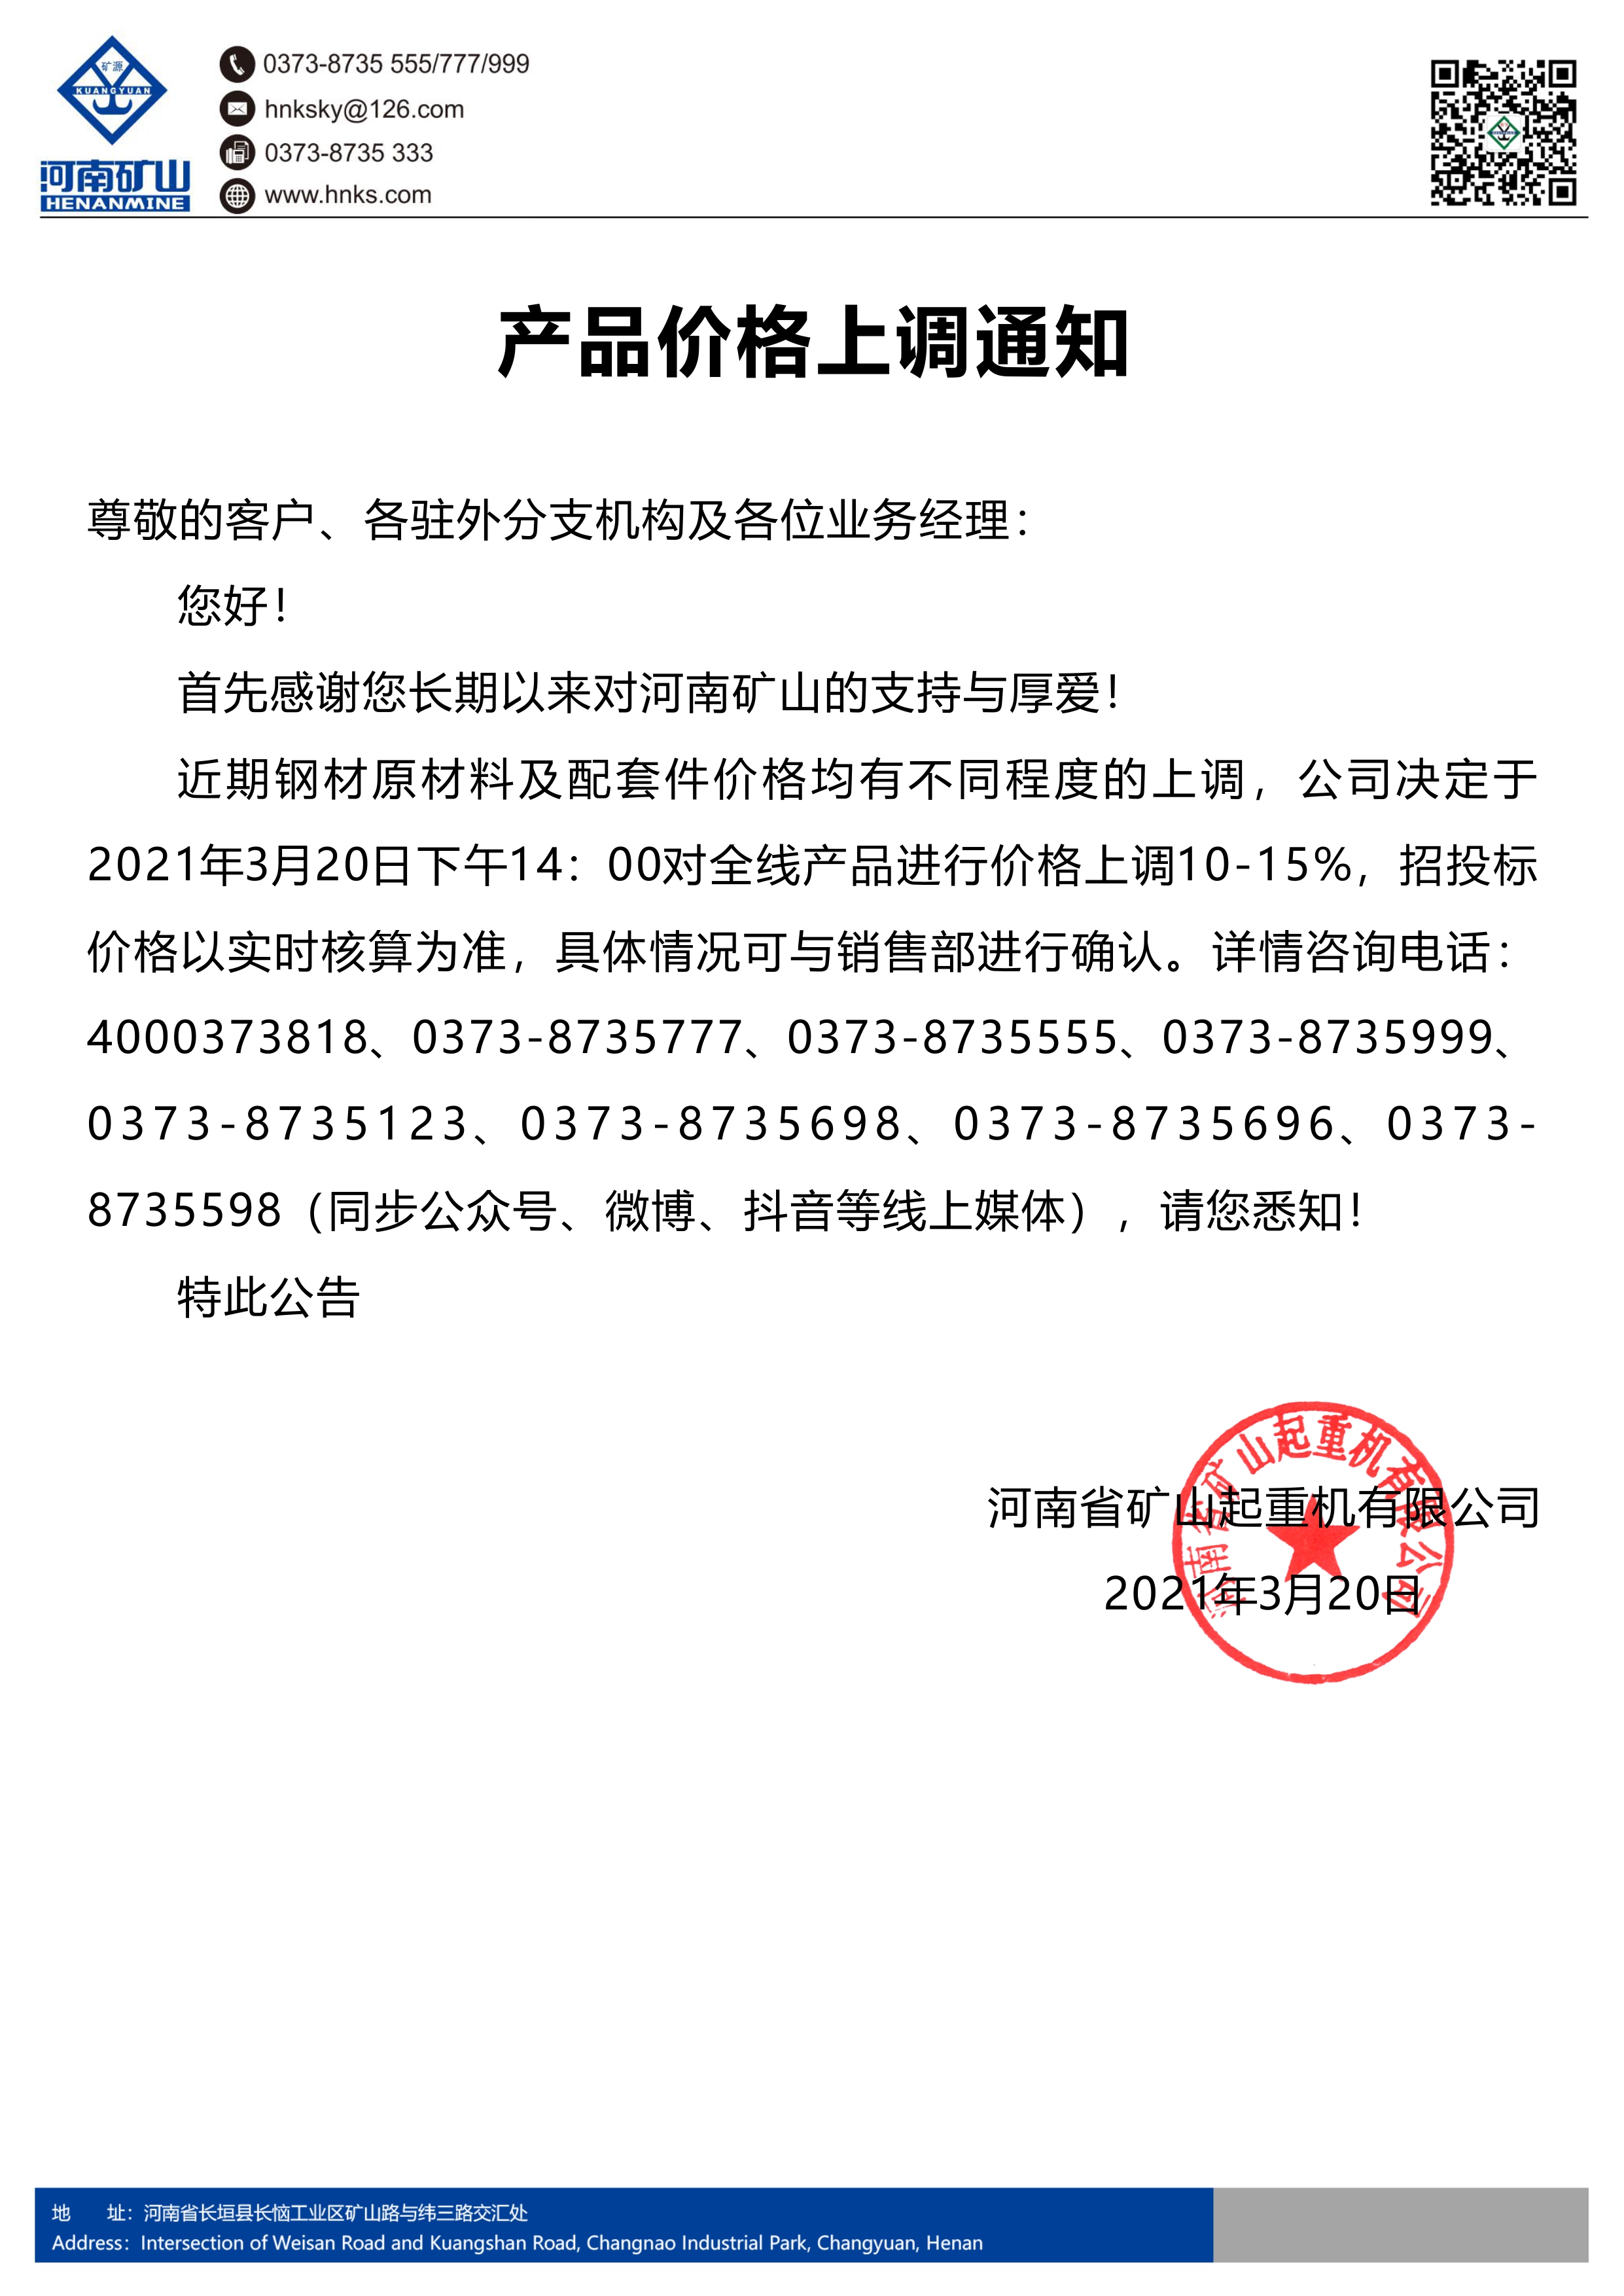 Henan Mine｜Notice of Product Price Increase